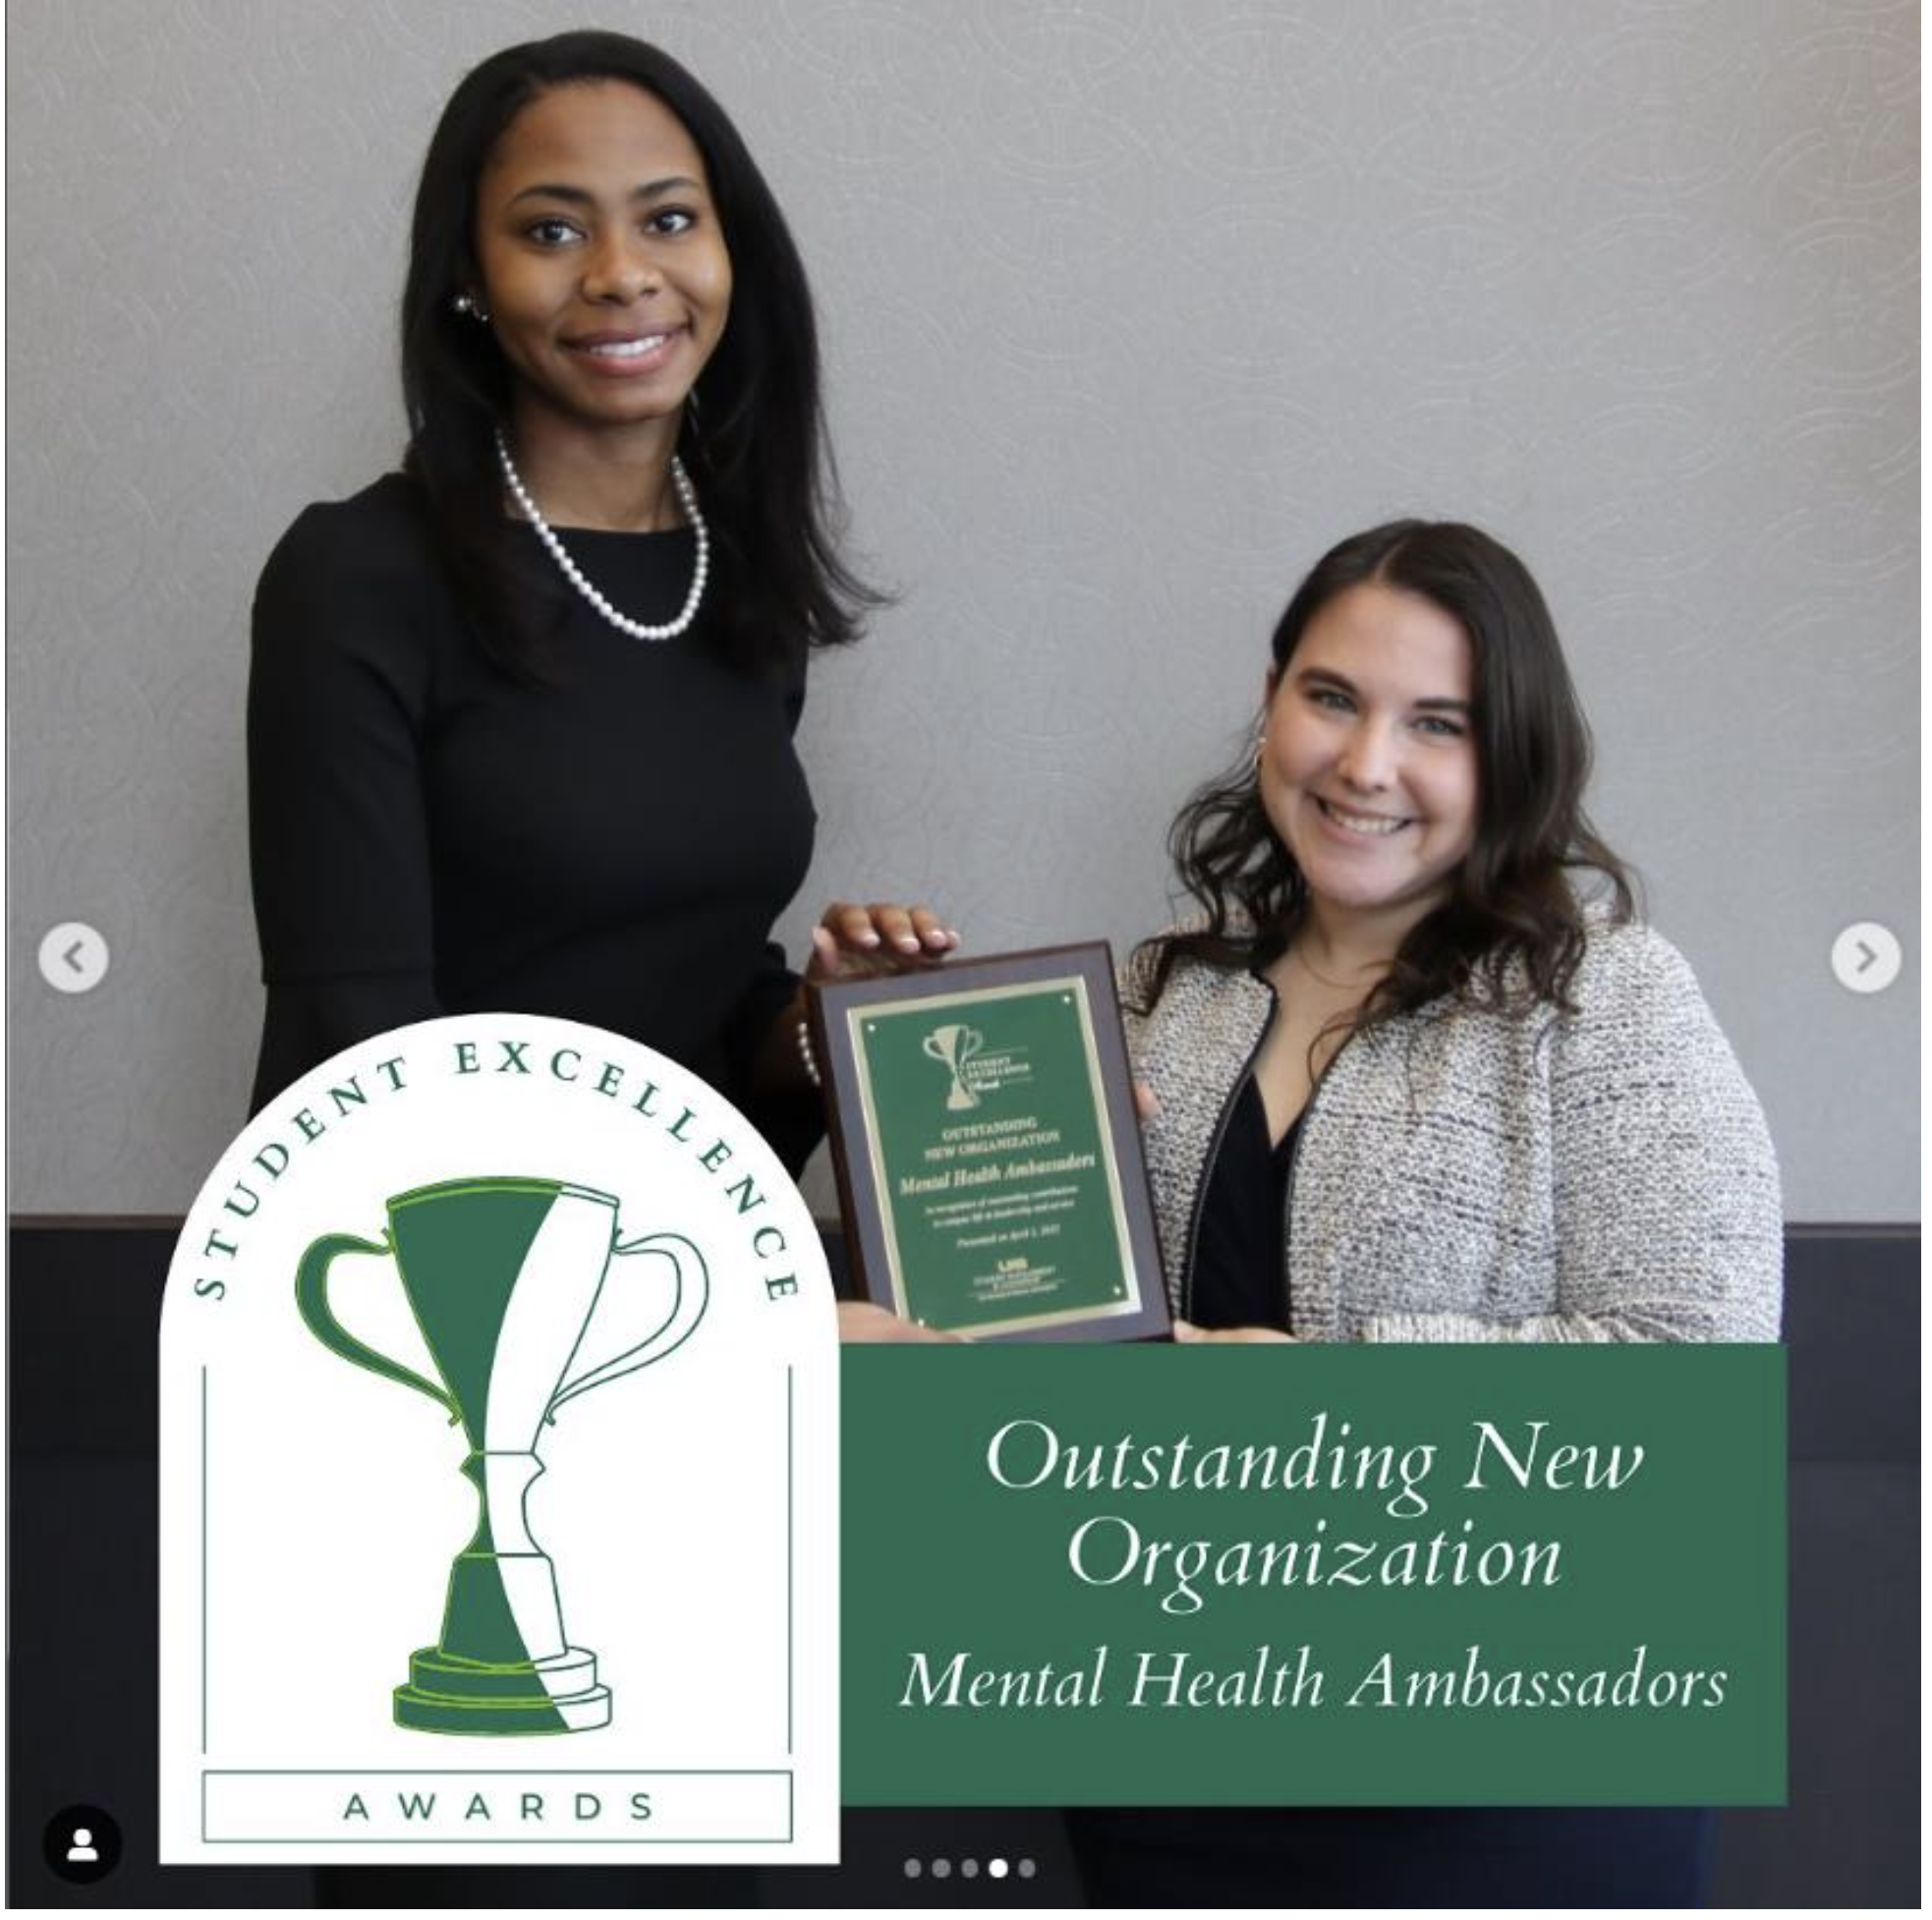 Mental Health Ambassadors recognized as the 2022 Outstanding New Organization in the Student Excellence Awards